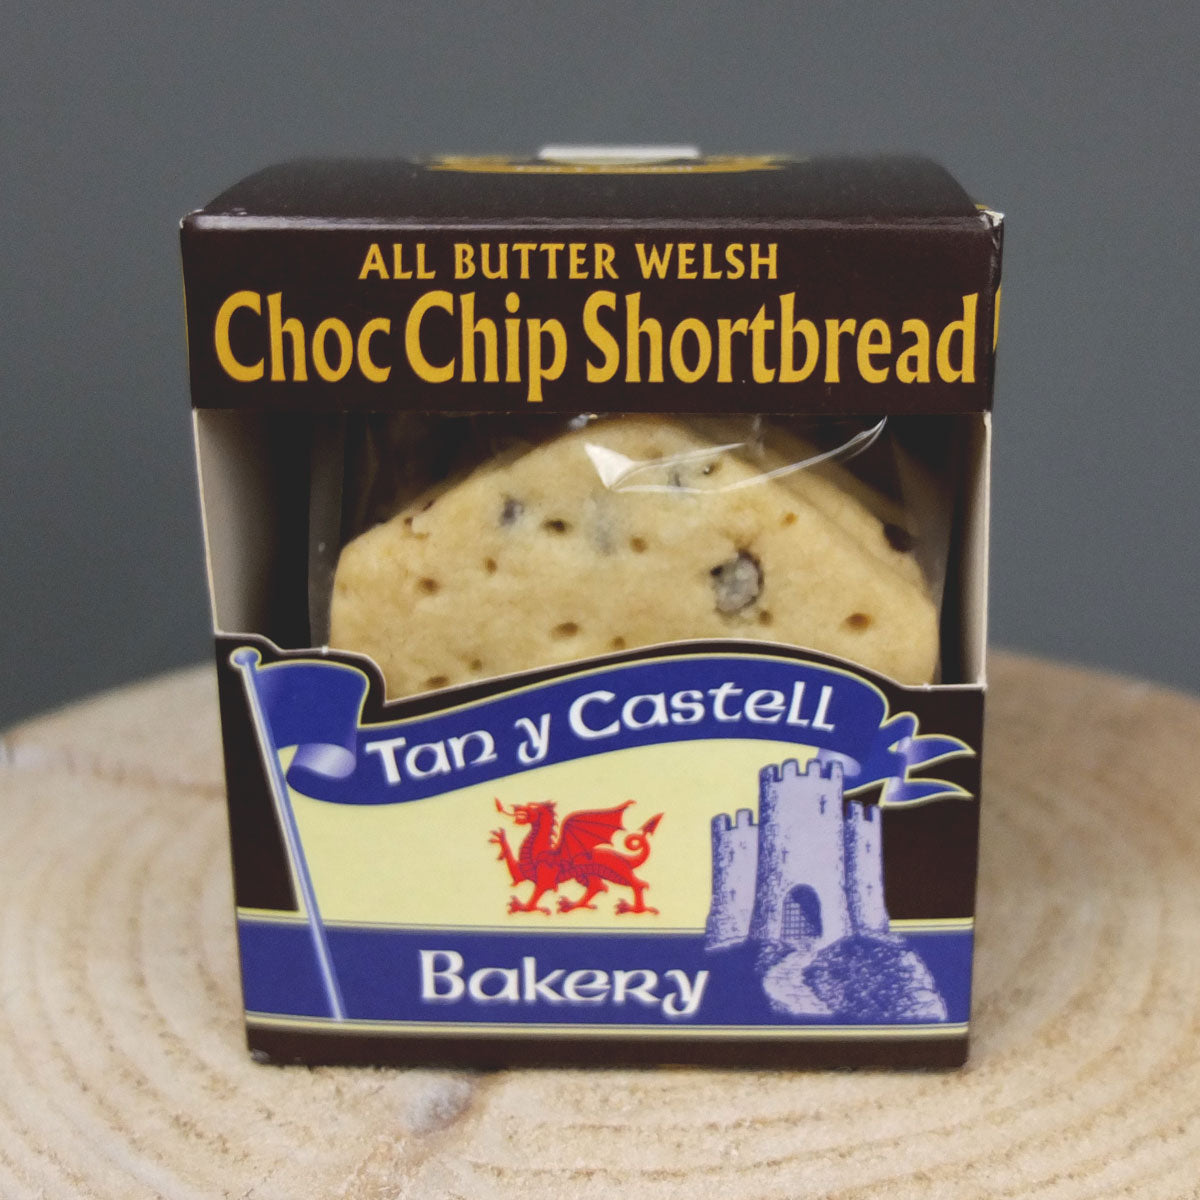 All Butter Welsh Choc Chip Shortbread - Box of 8